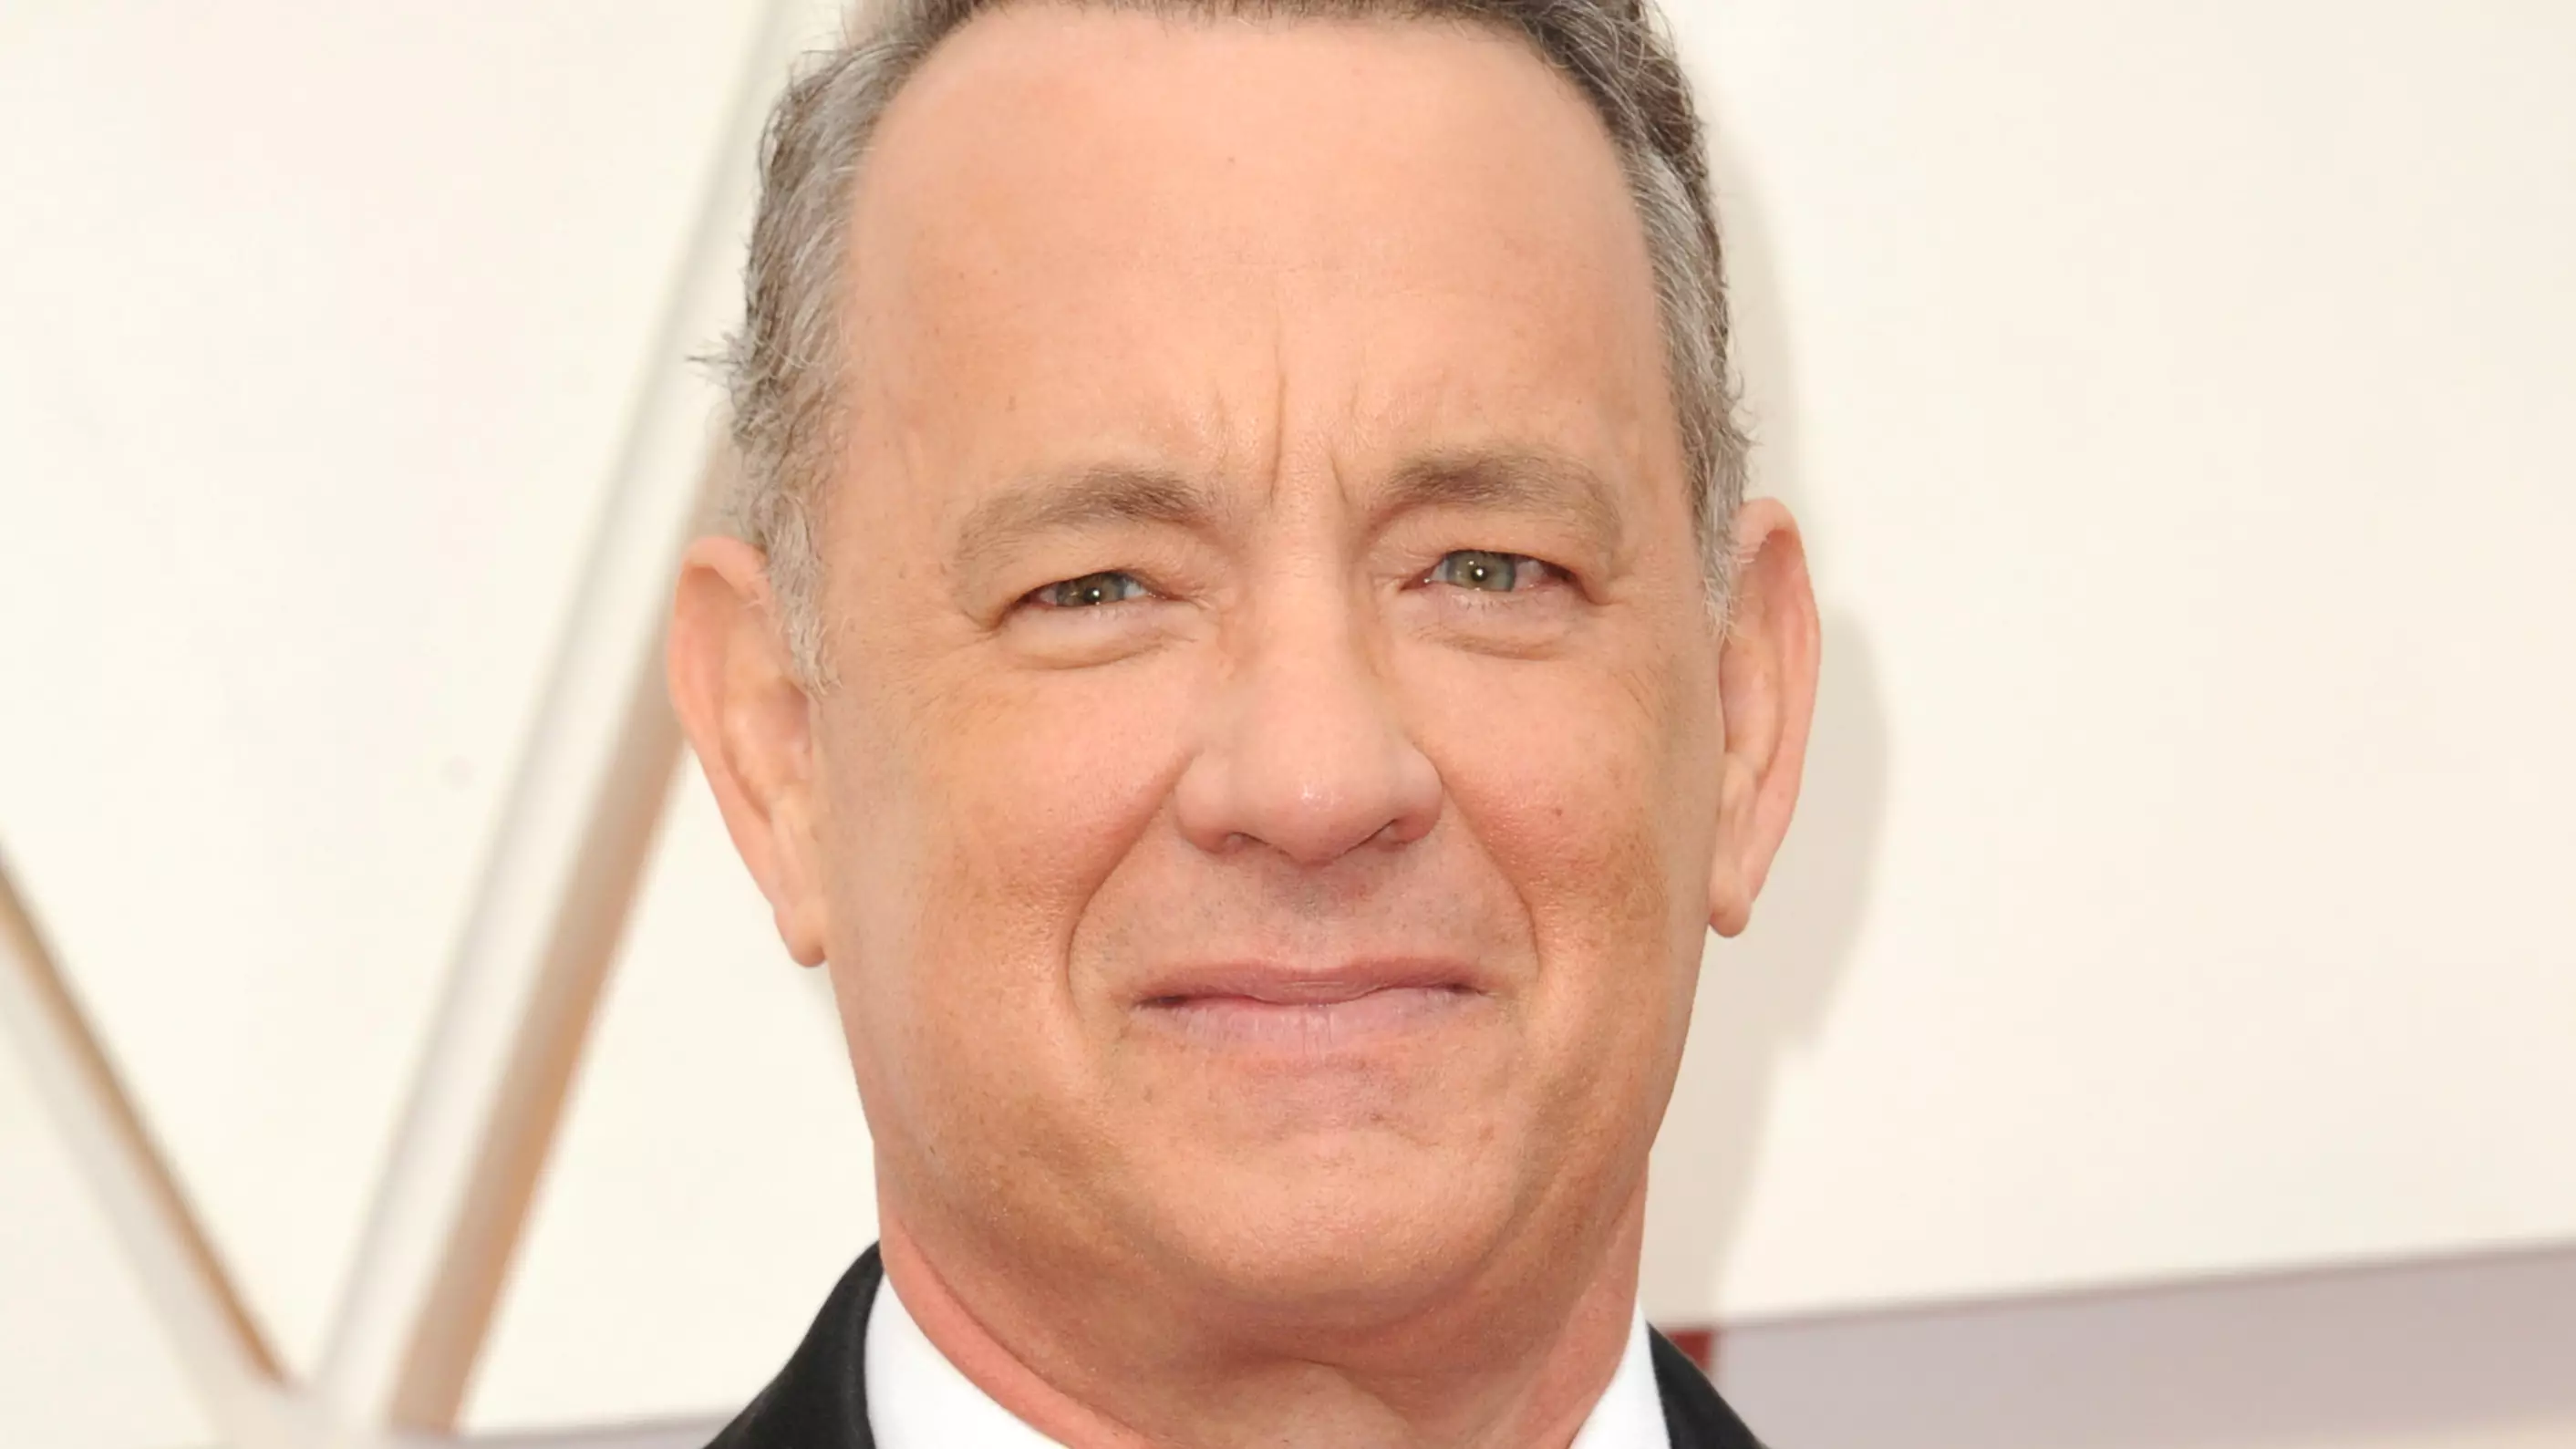 Tom Hanks 'In Talks' To Play Geppetto In Disney's Live-Action Remake Of Pinocchio